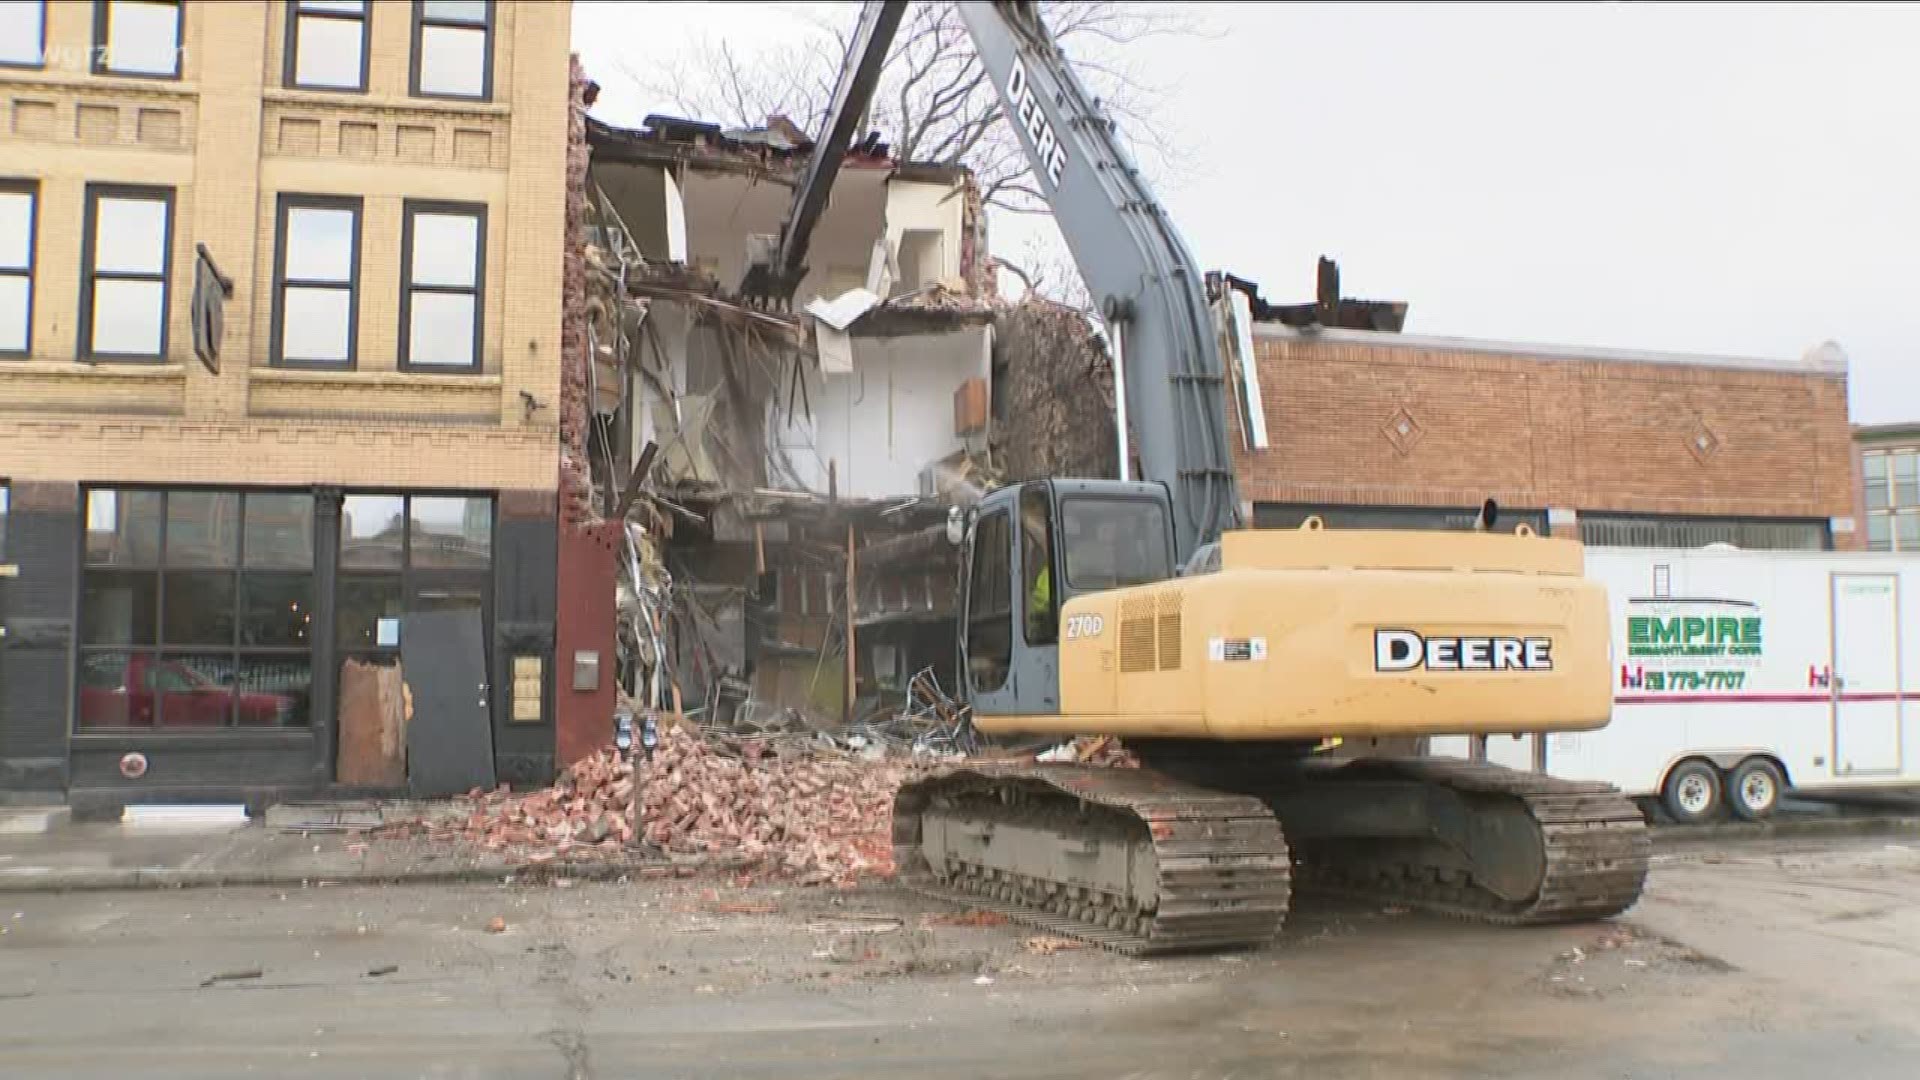 Ellicott Street left to eateries scrambling to get back up and running during the busy holiday season. Emergency demolition left Adamucci's Backery at loss.